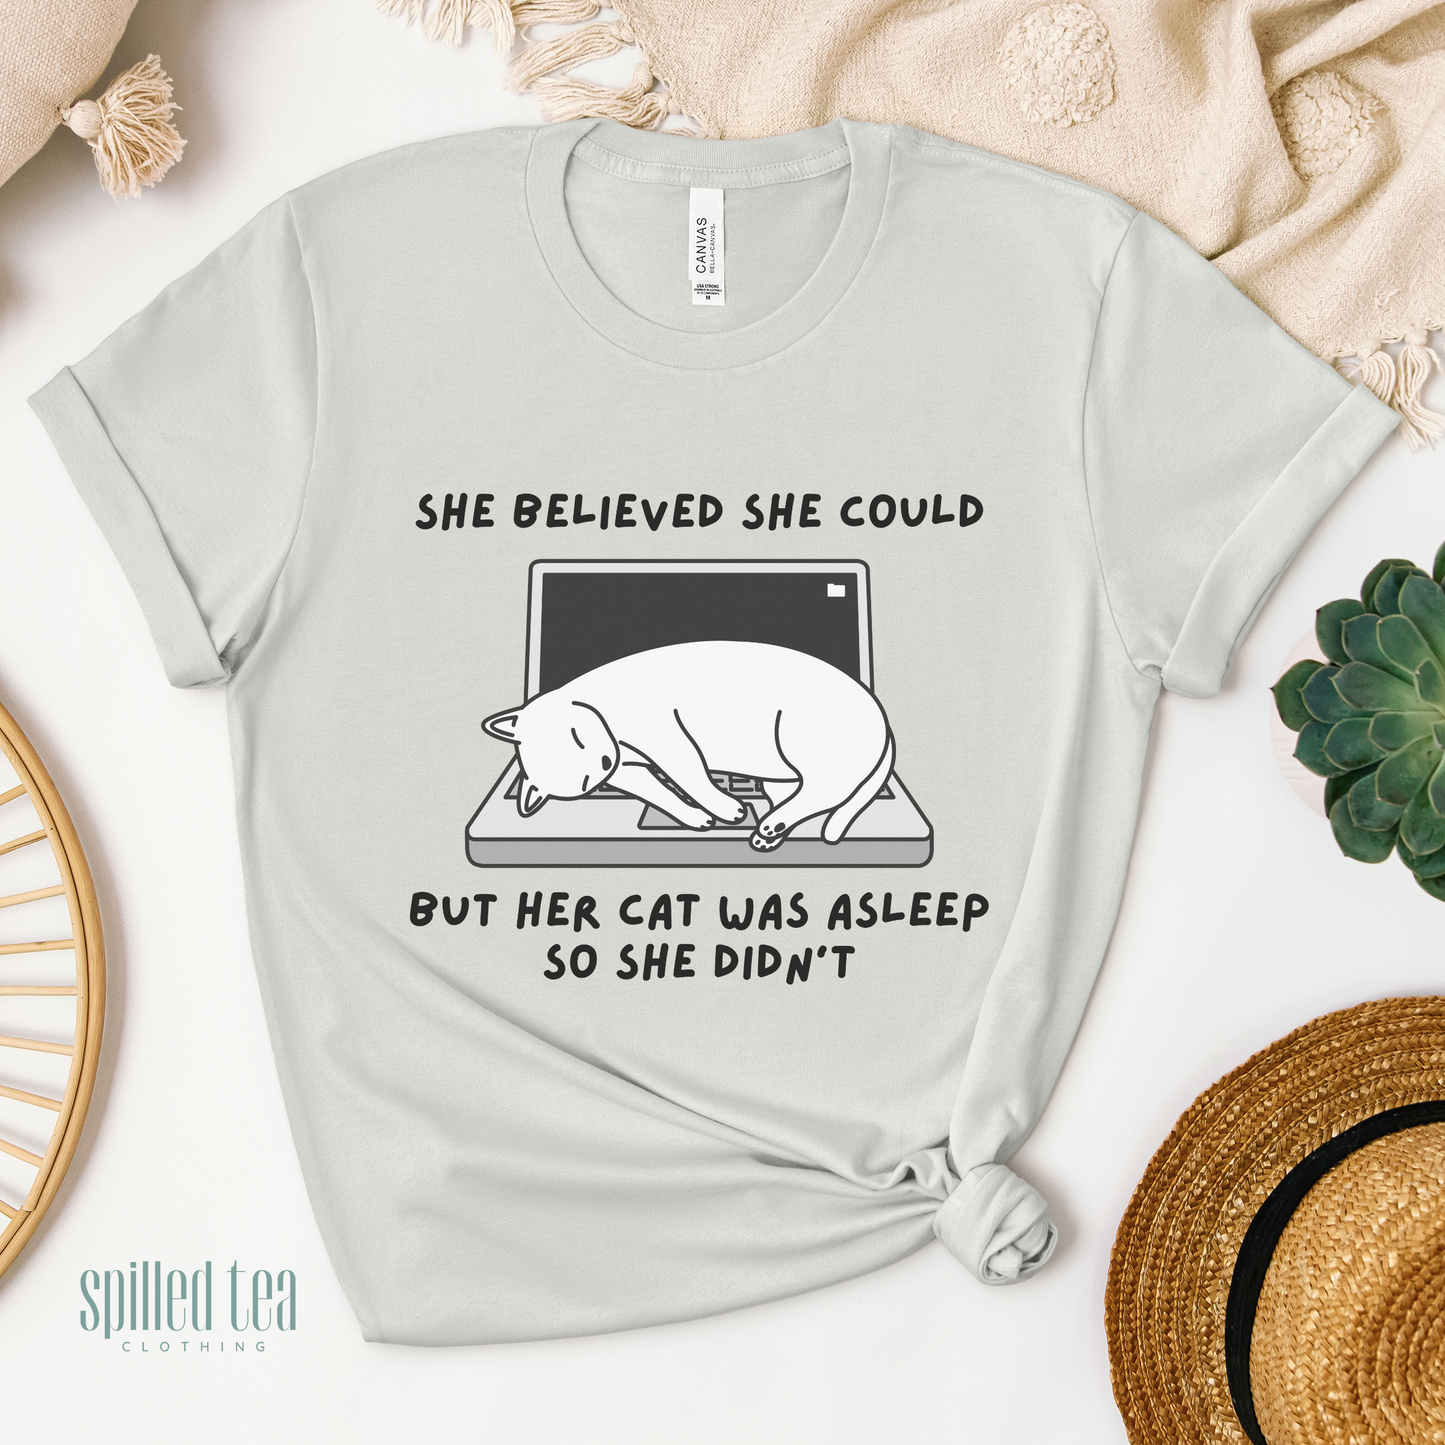 She Believed She Could, But T-Shirt